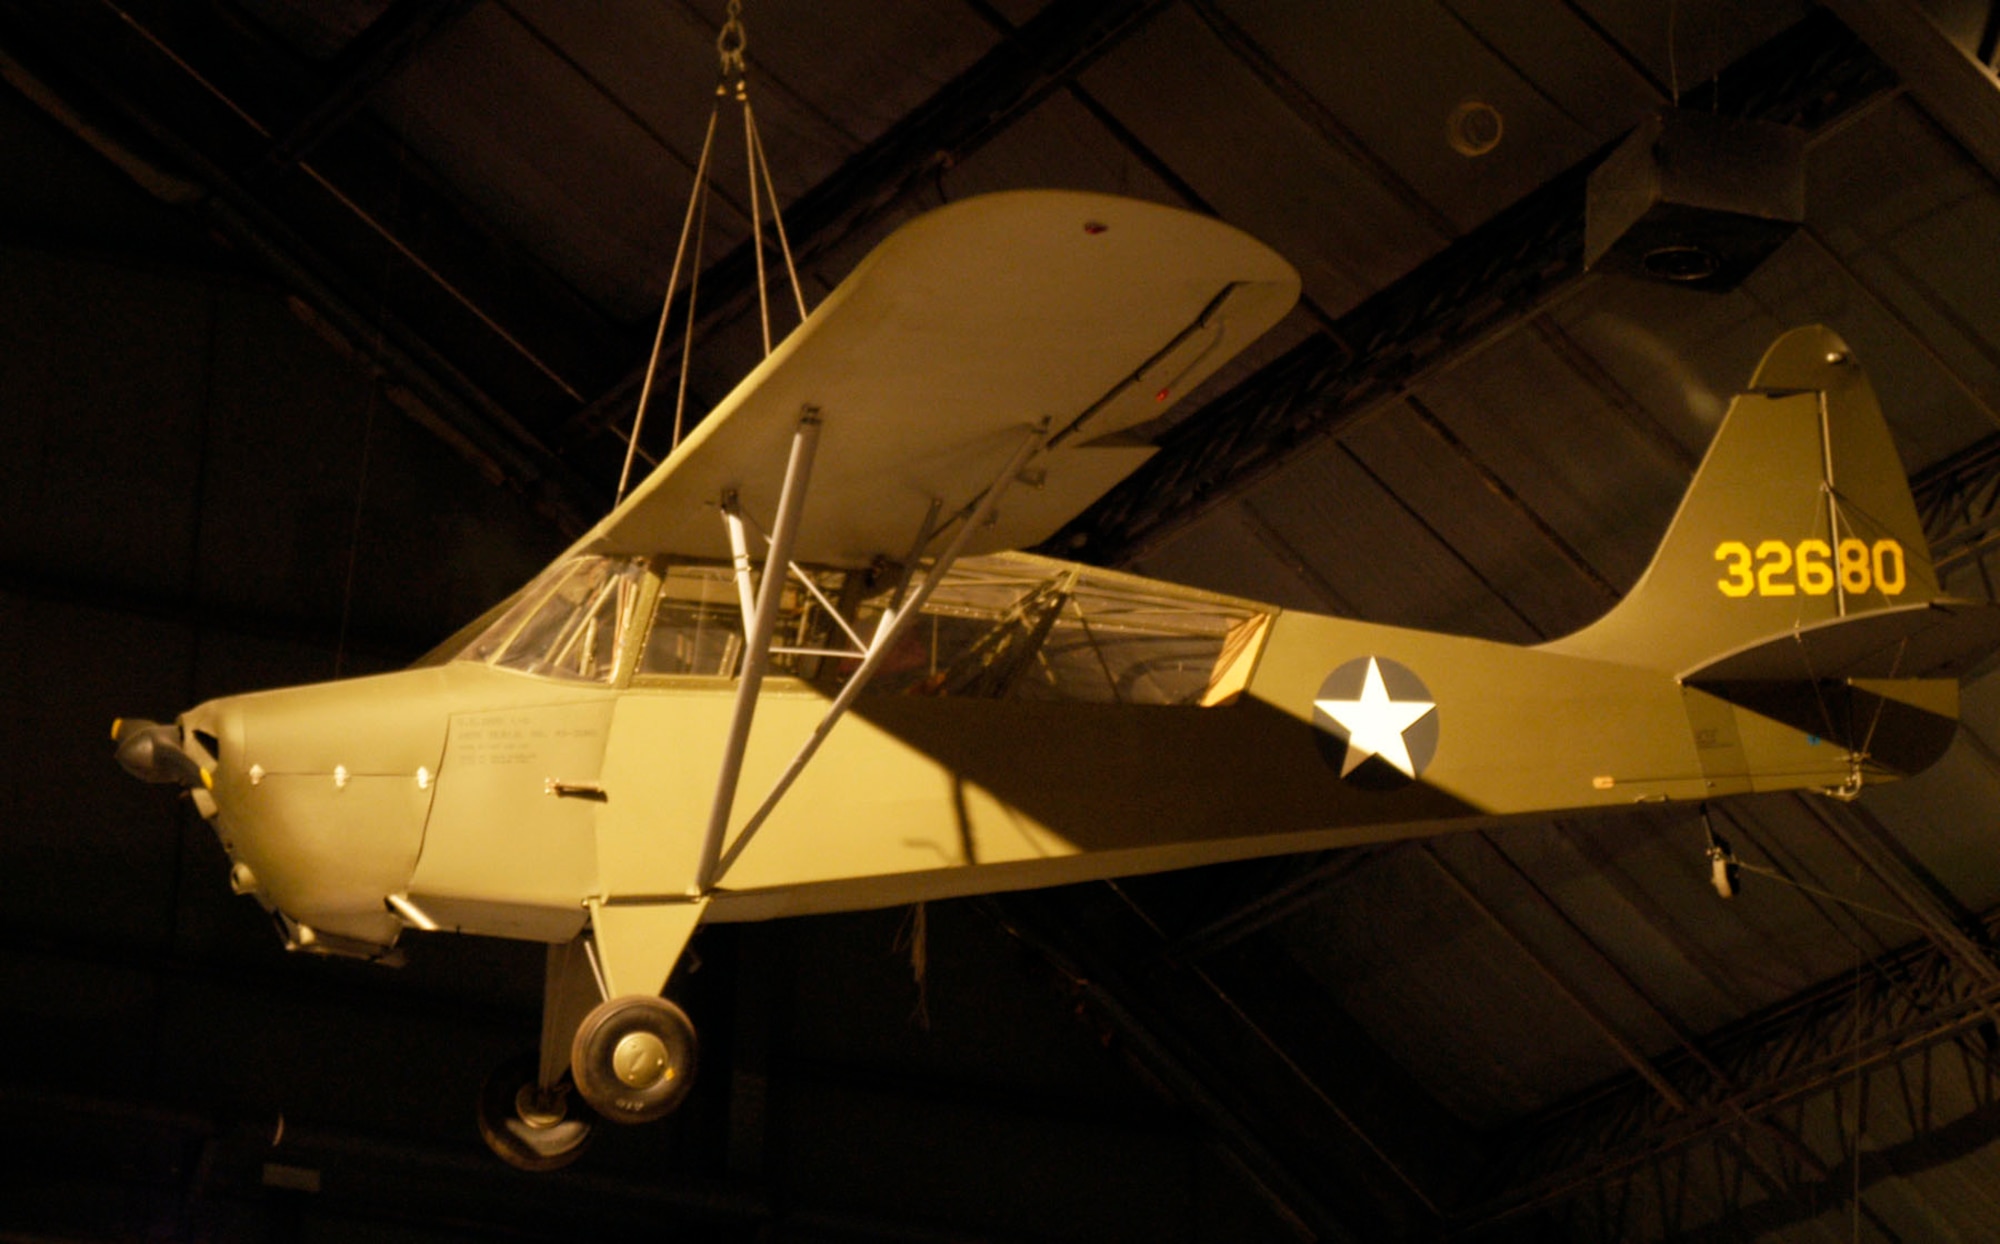 DAYTON, Ohio -- Interstate L-6 "Grasshopper" at the National Museum of the United States Air Force. (U.S. Air Force photo)